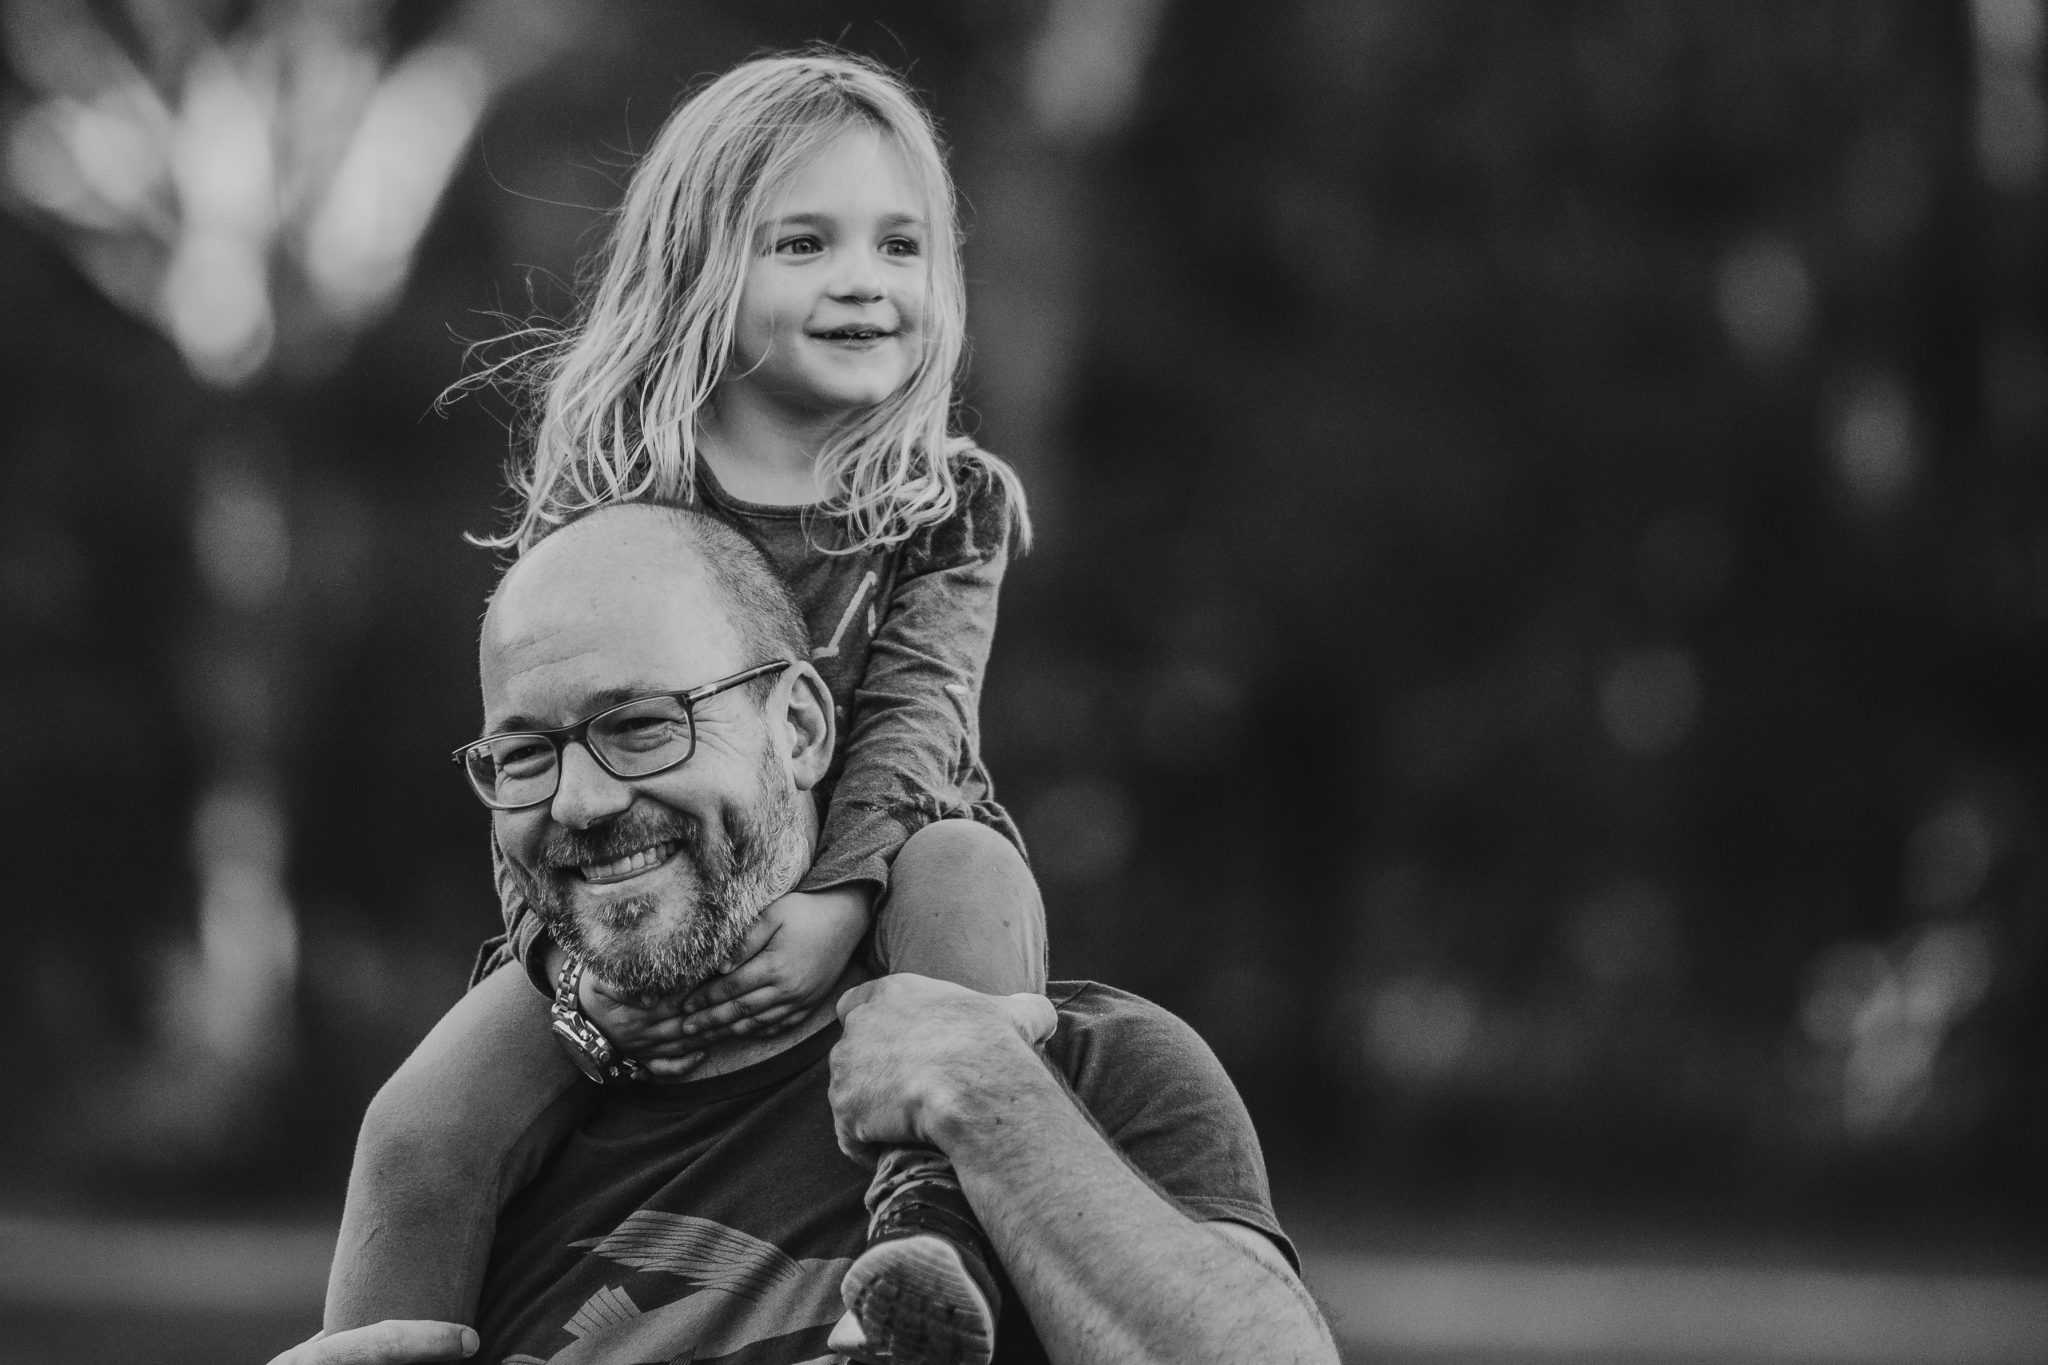 Black and white image of girl on her dad's shoulders